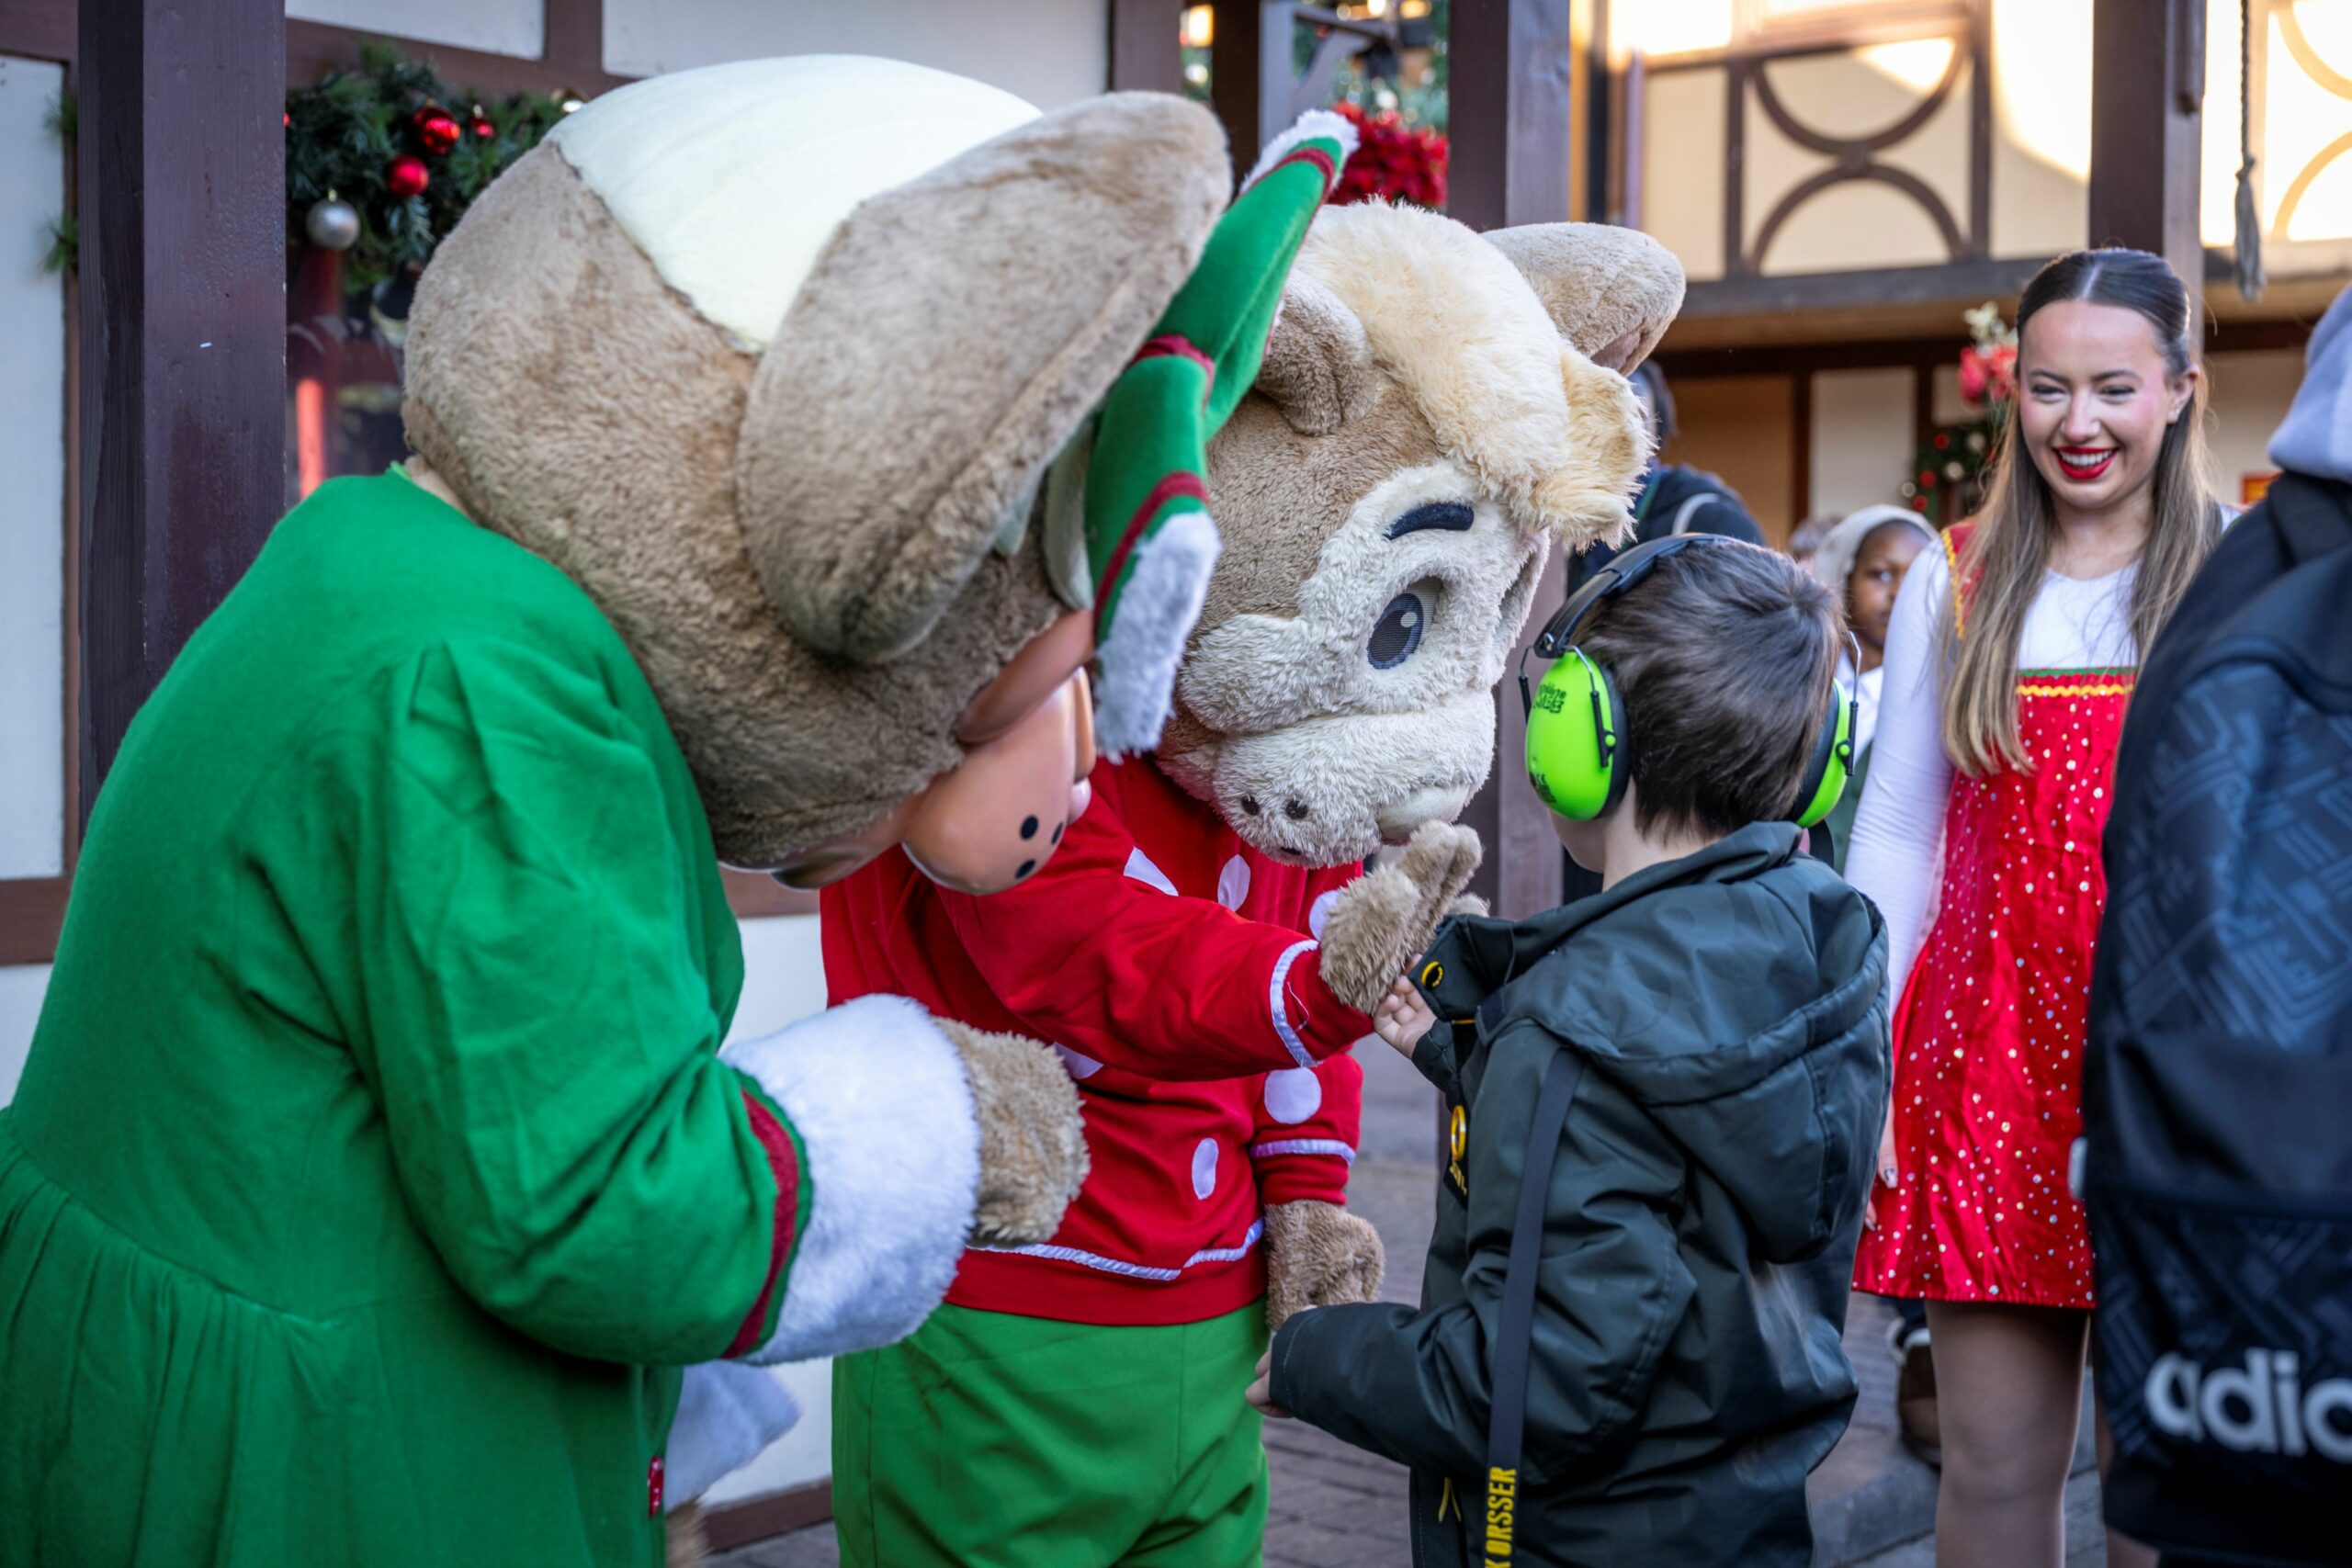 Gulliver’s hosts special festive children’s charity events